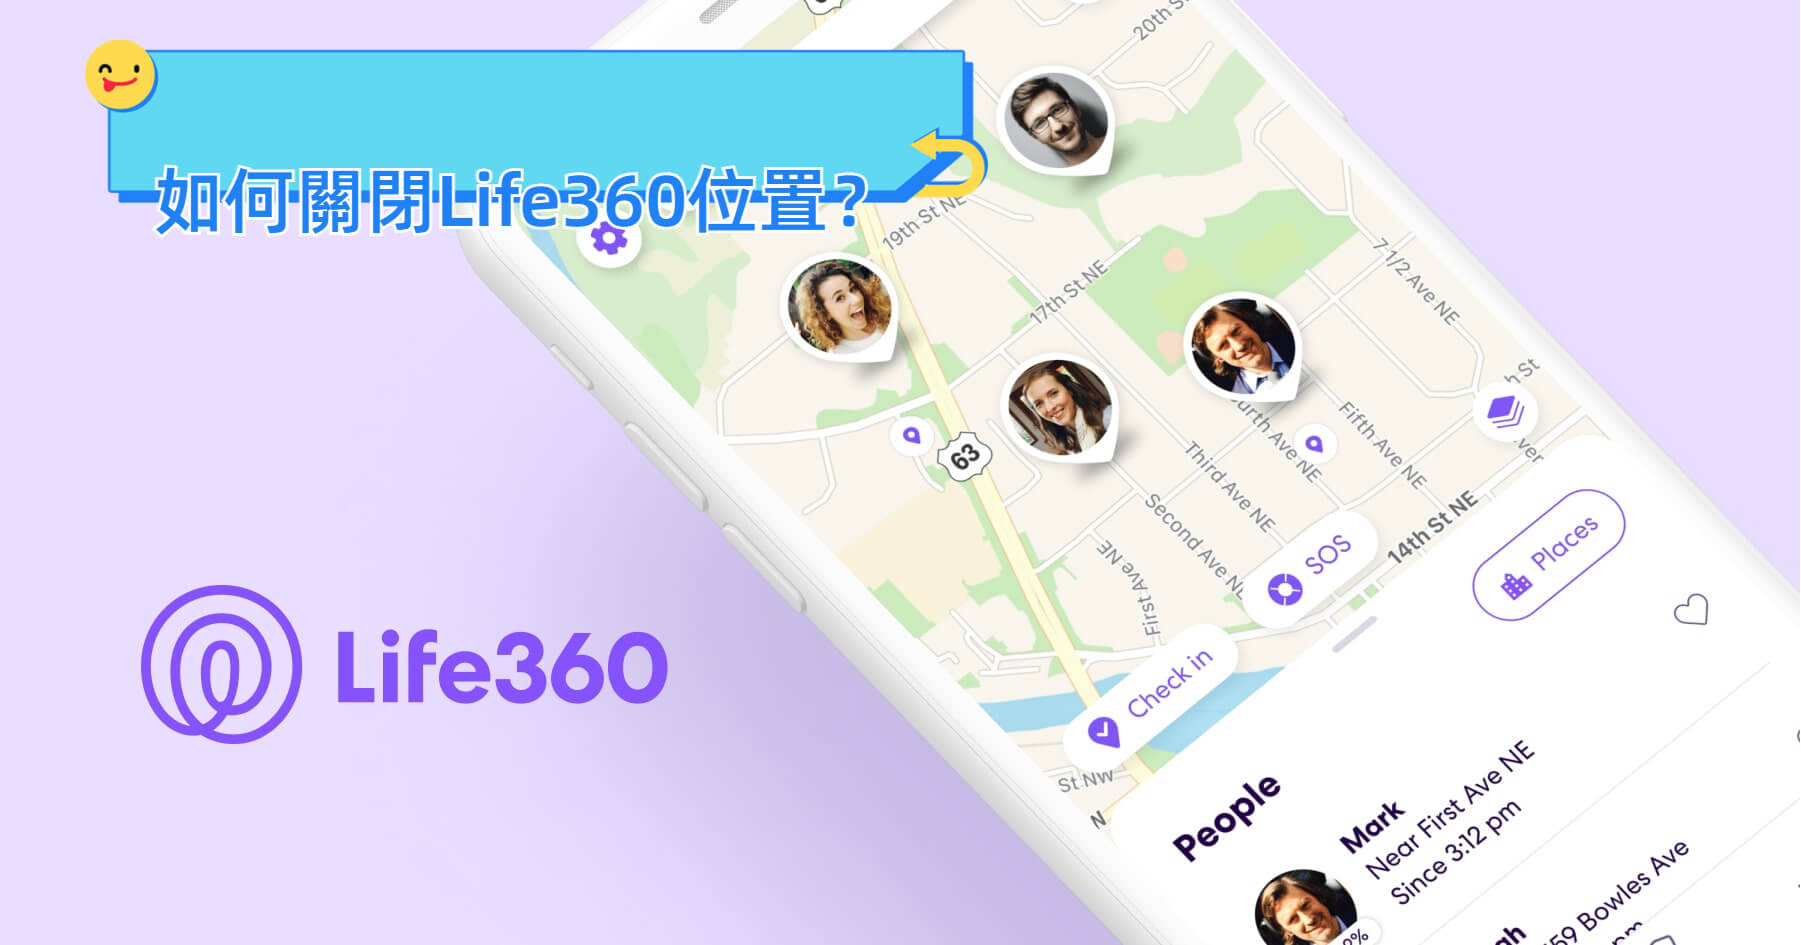 How to Turn off Location on Life360 Without Anyone Knowing